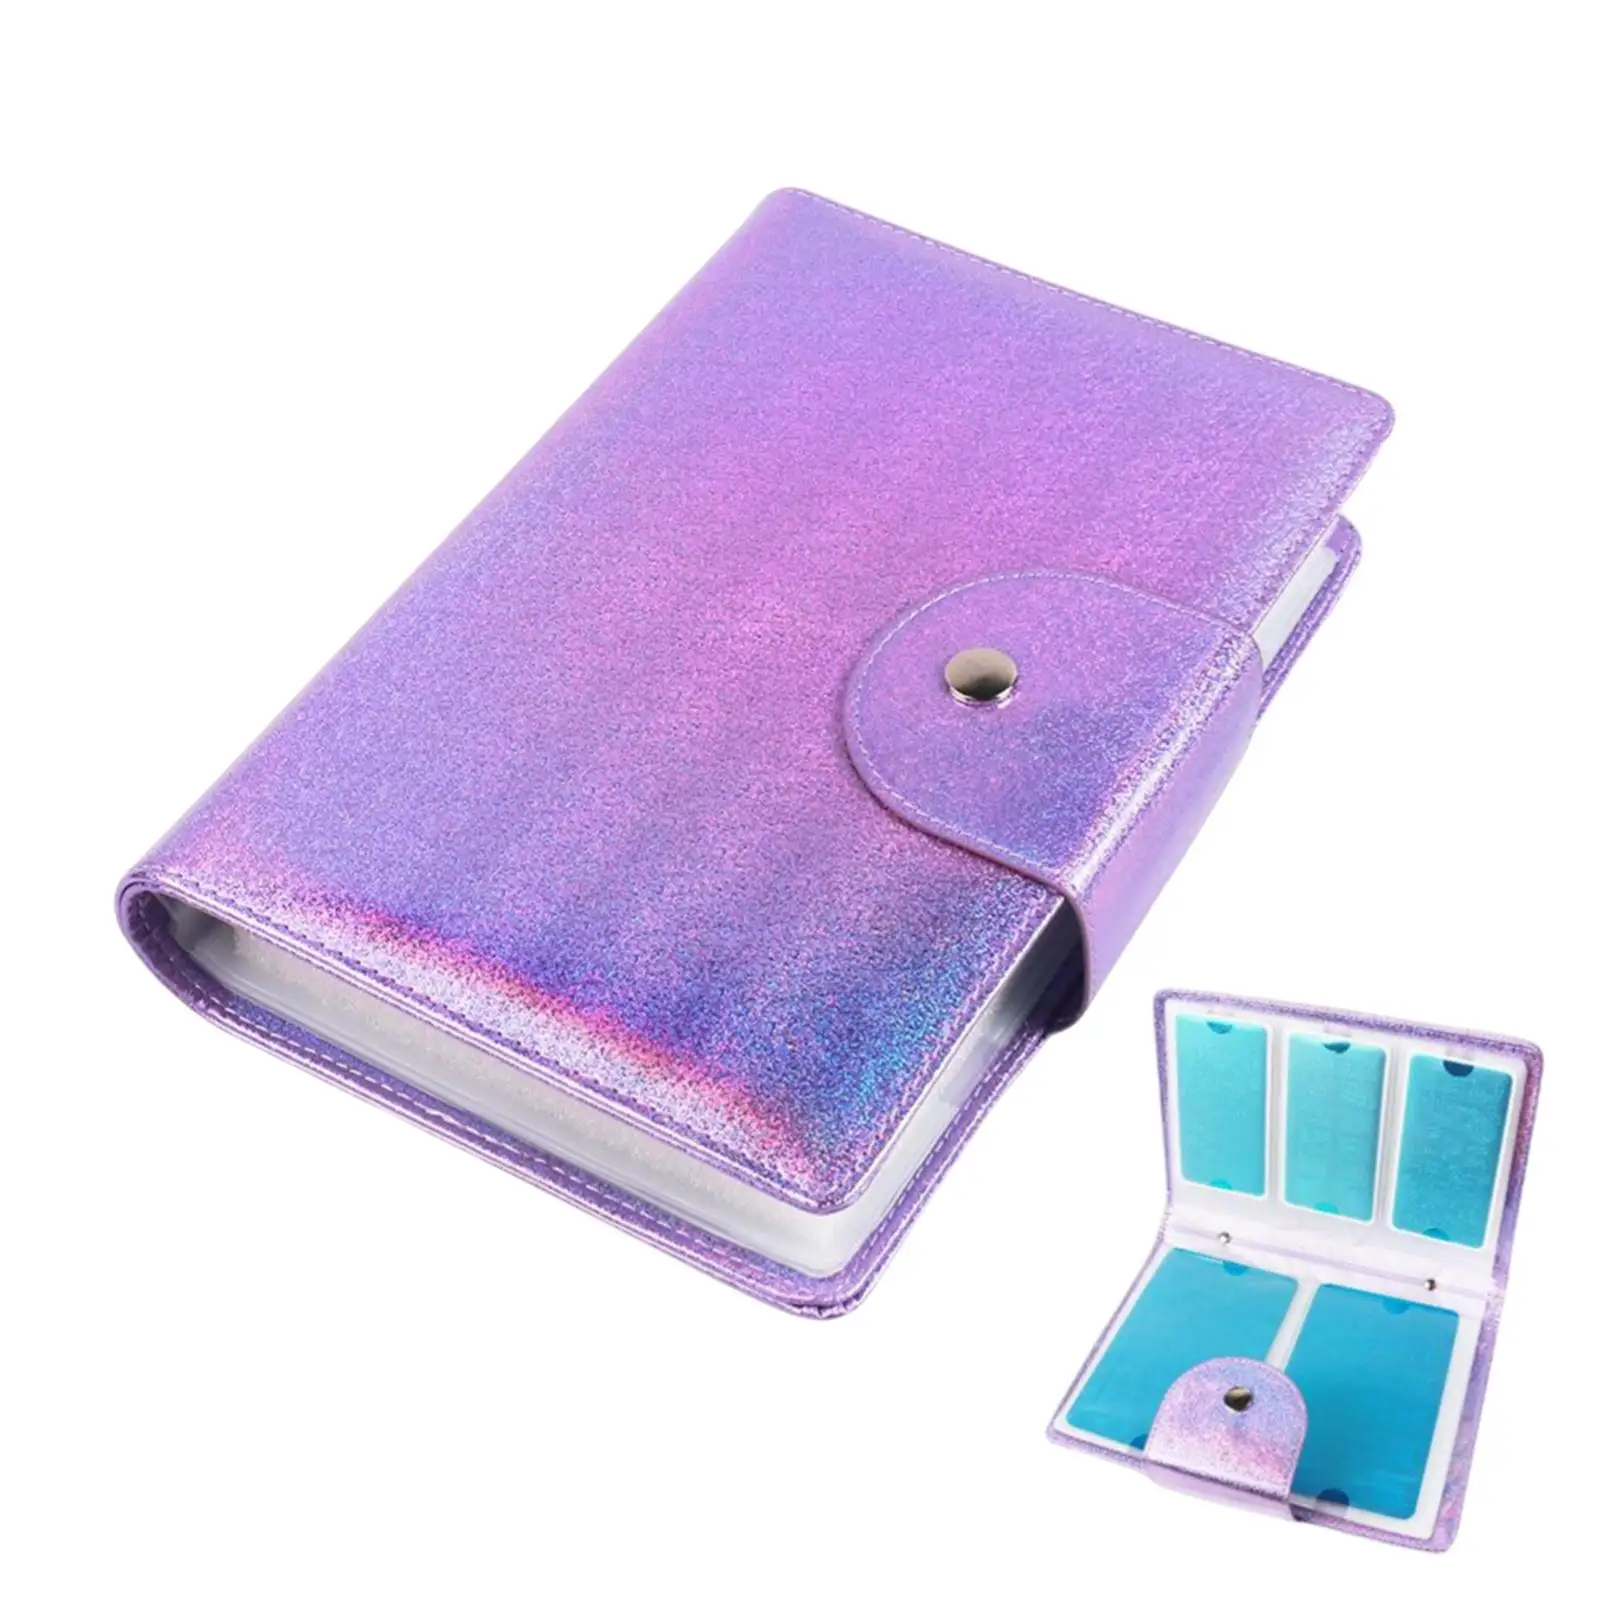 Nail Template Case Rectangular DIY Tool Storage Printing Molds Collection for Nail Art Plates Accessories